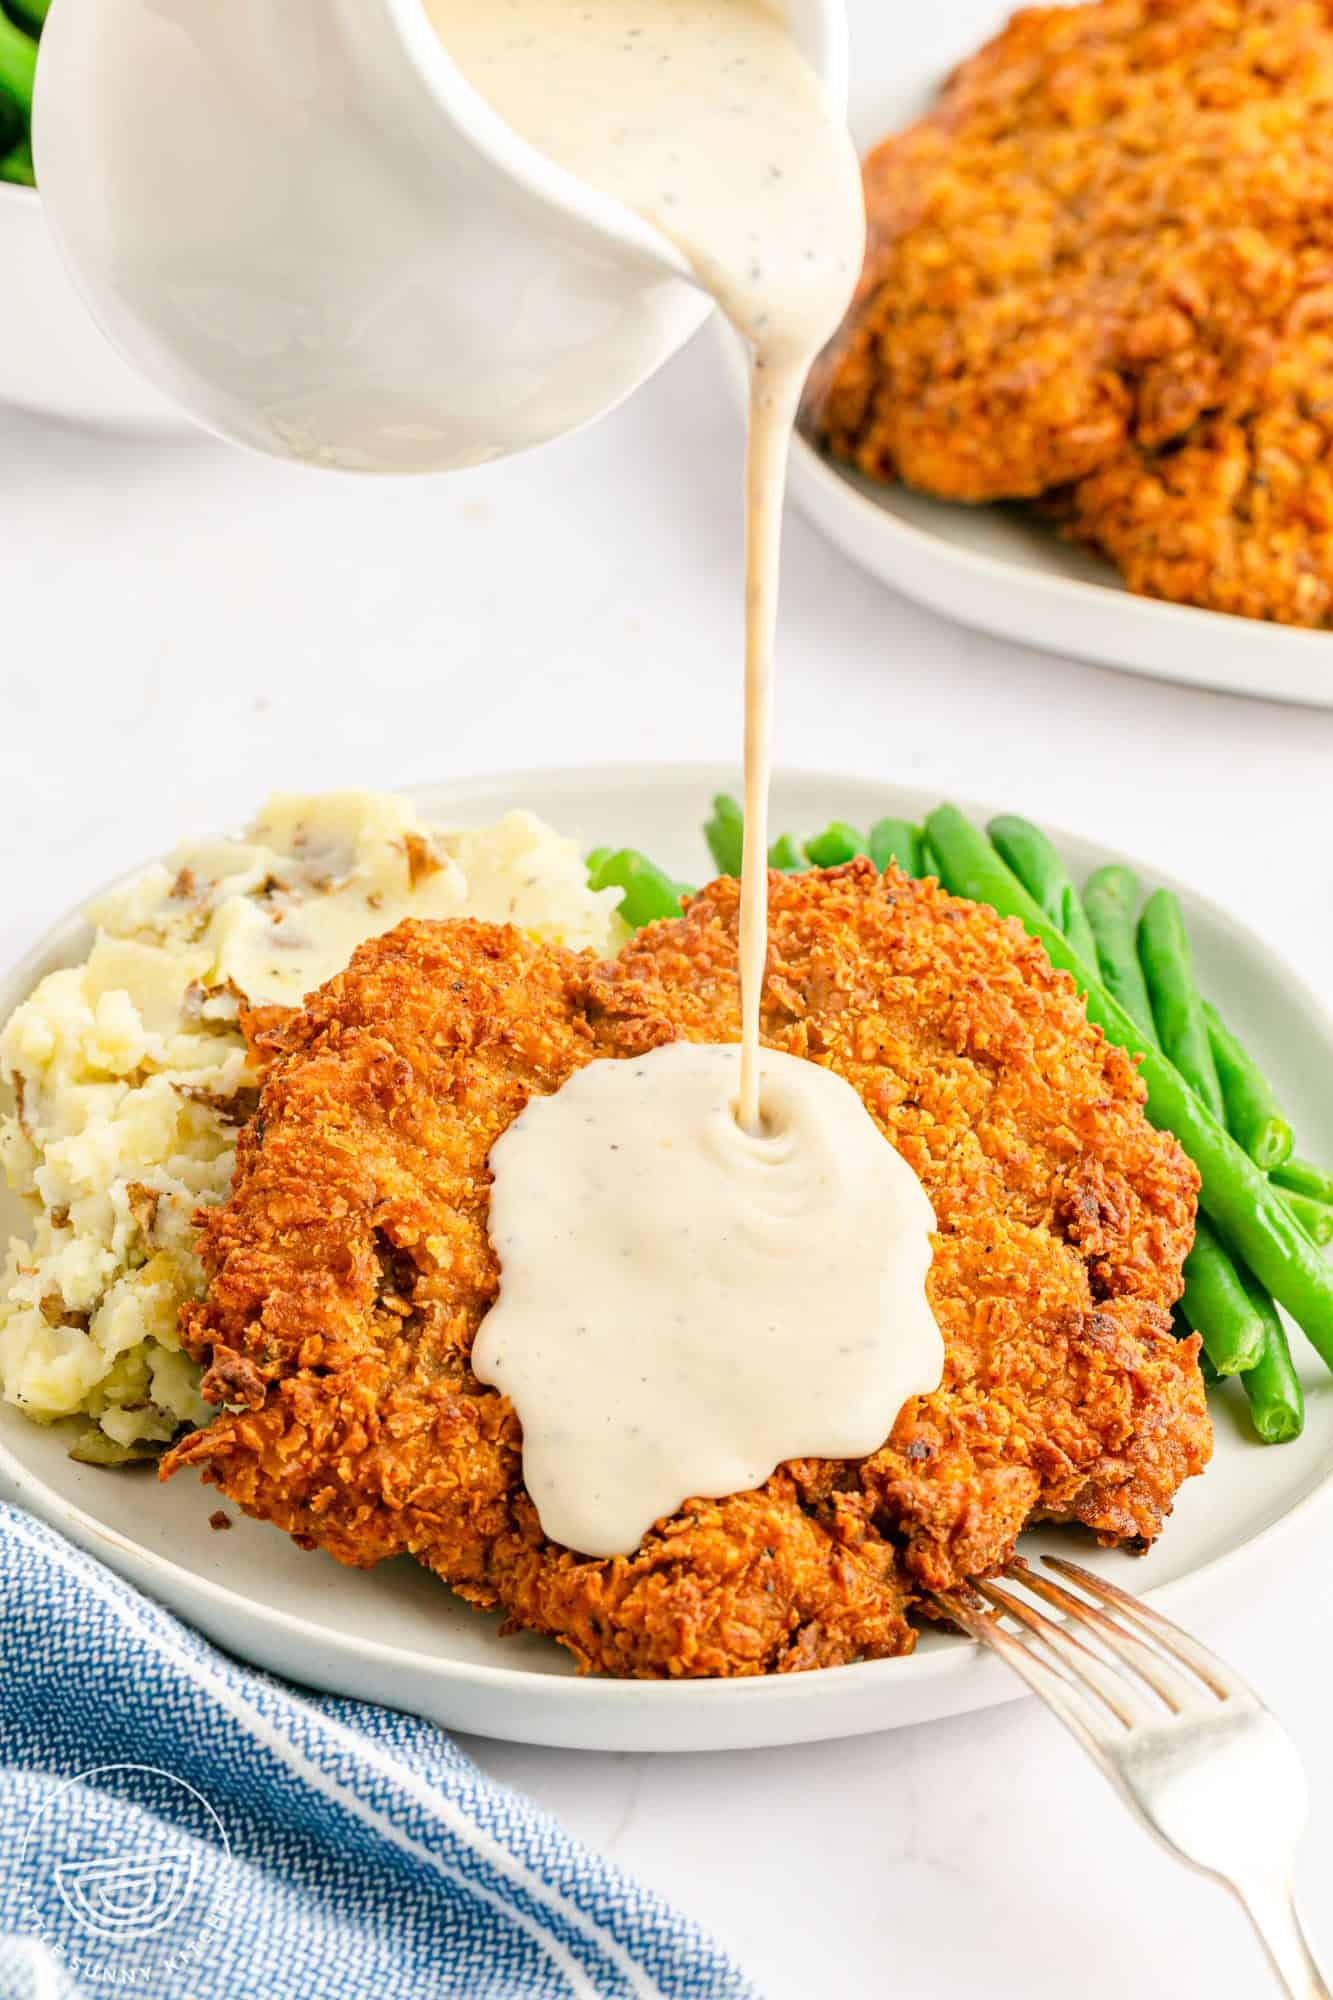 Pouring white gravy over chicken fried steak that is served on a white plate with mashed potatoes and green beans